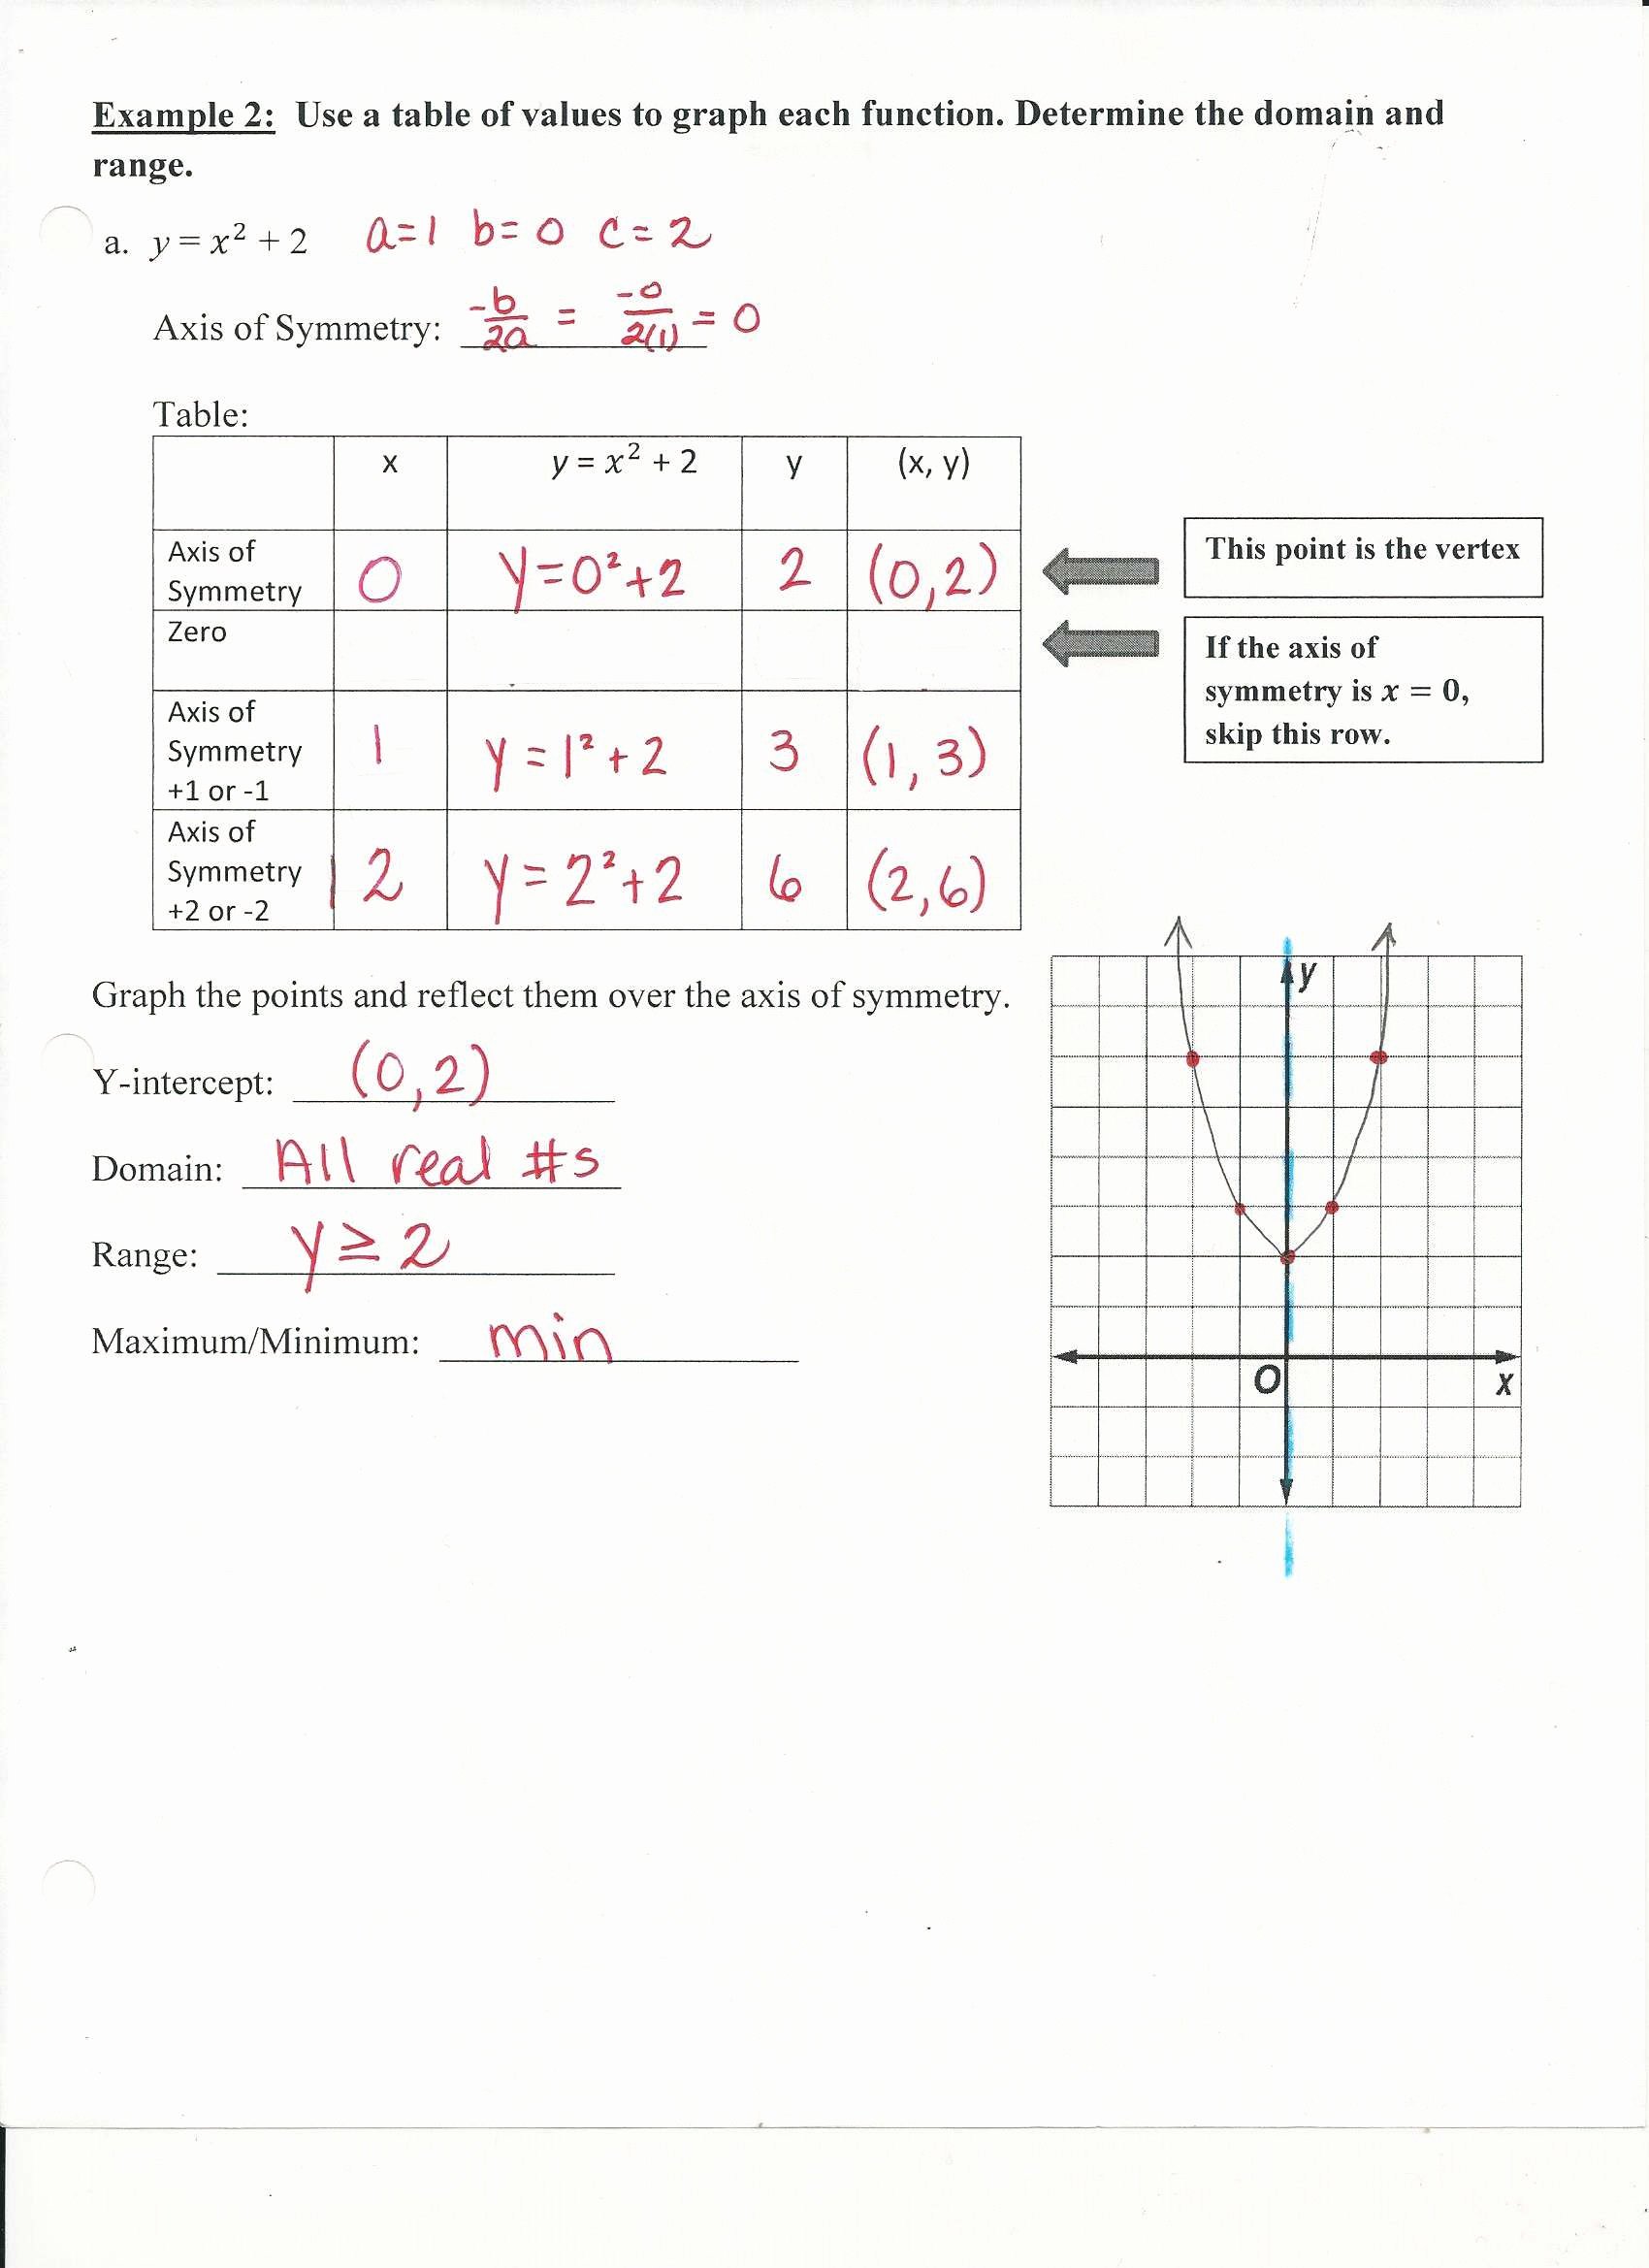 Domain and Range From Graphs Worksheet Unique Domain and Range Graphs Worksheet Answers Worksheet